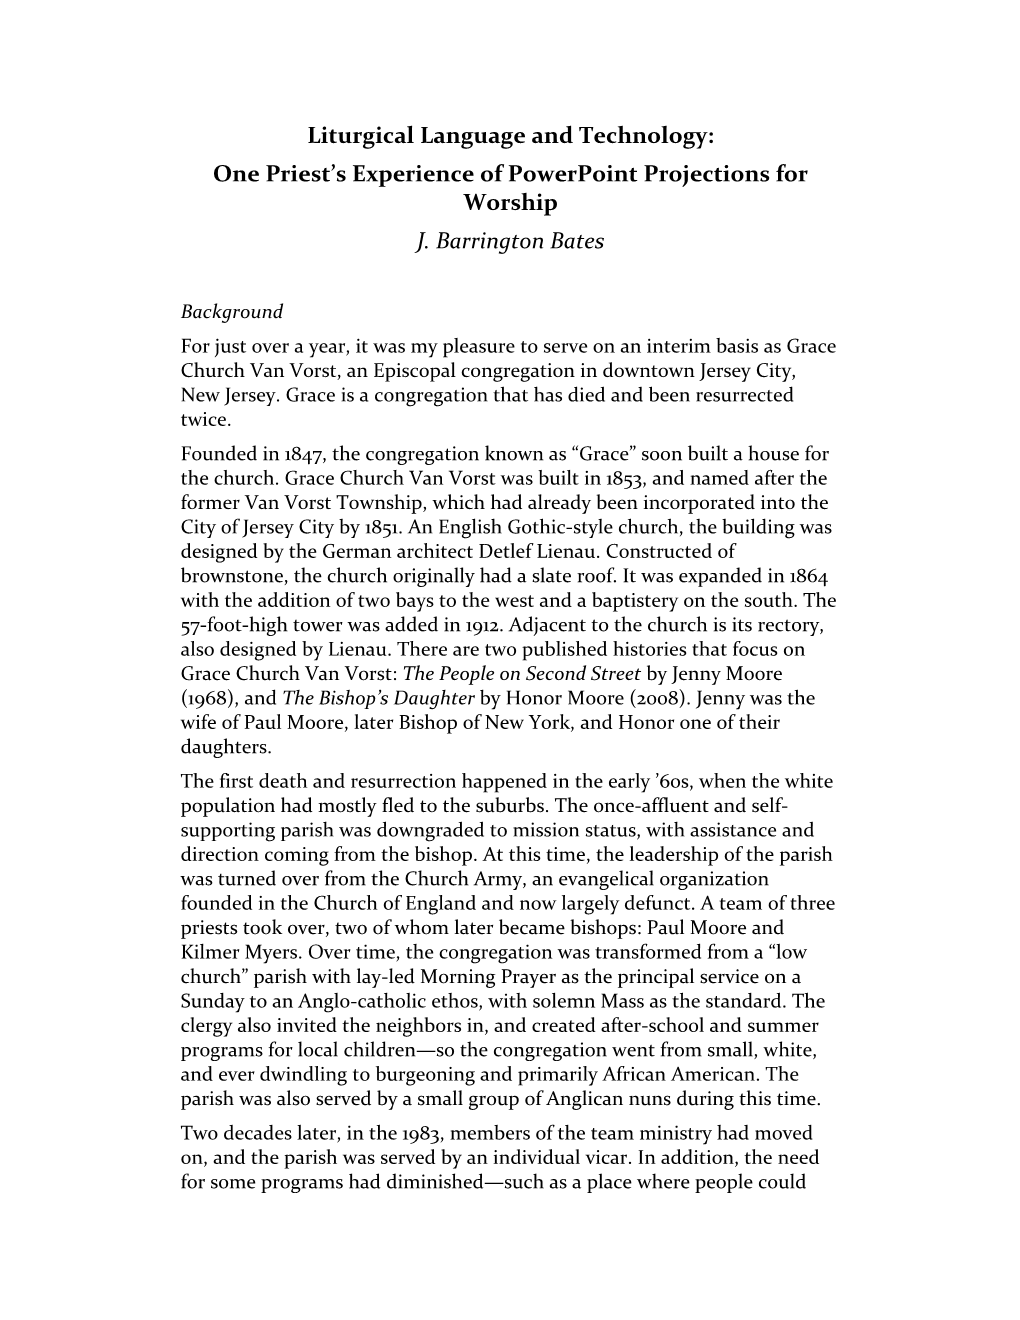 Liturgical Language and Technology: One Priest's Experience of Powerpoint Projections for Worship J. Barrington Bates